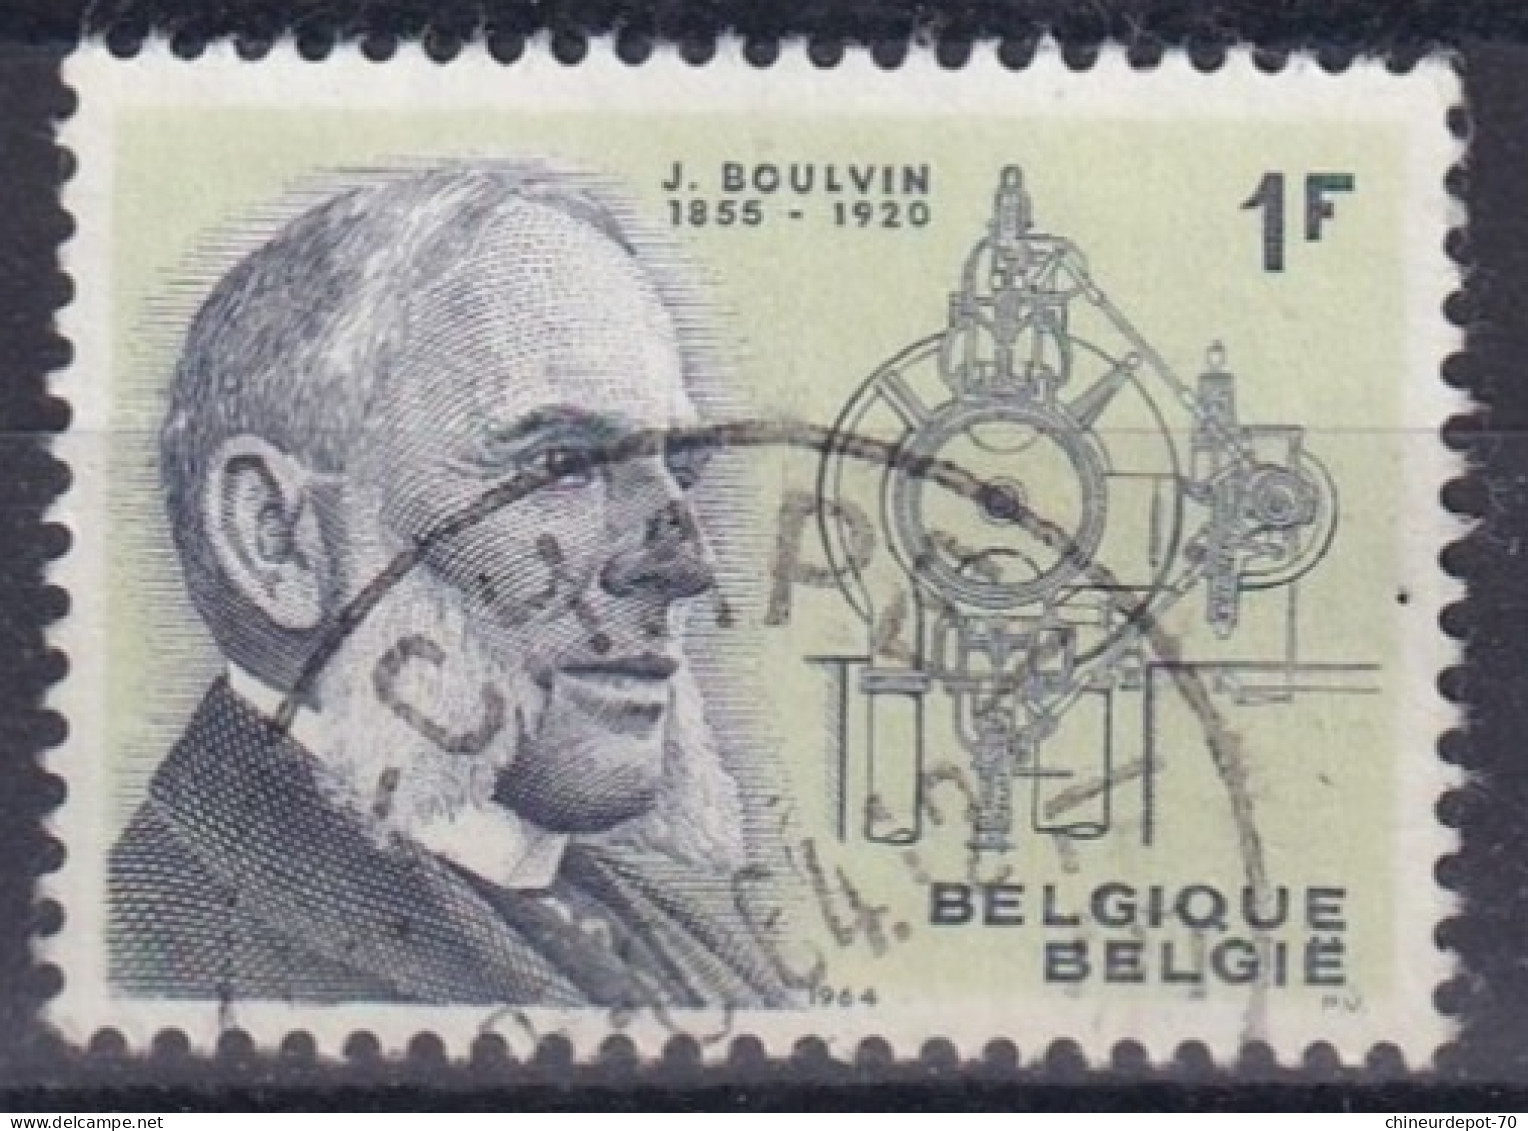 J BOULVIN  CACHET CHAPELLE - Used Stamps